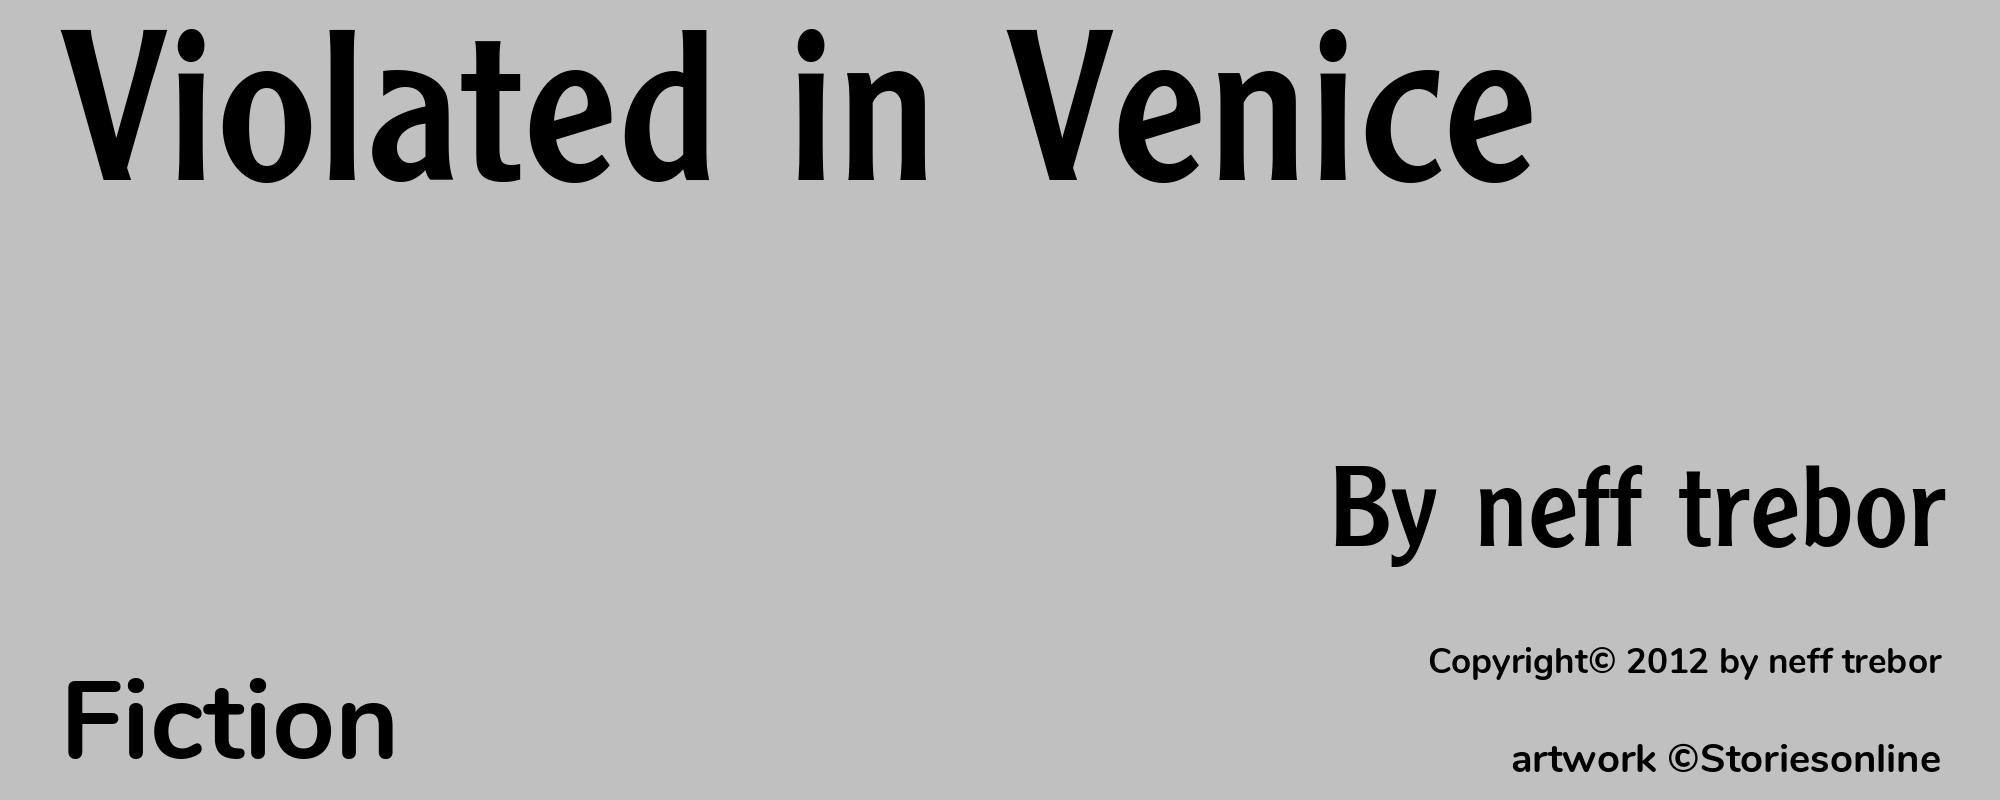 Violated in Venice - Cover